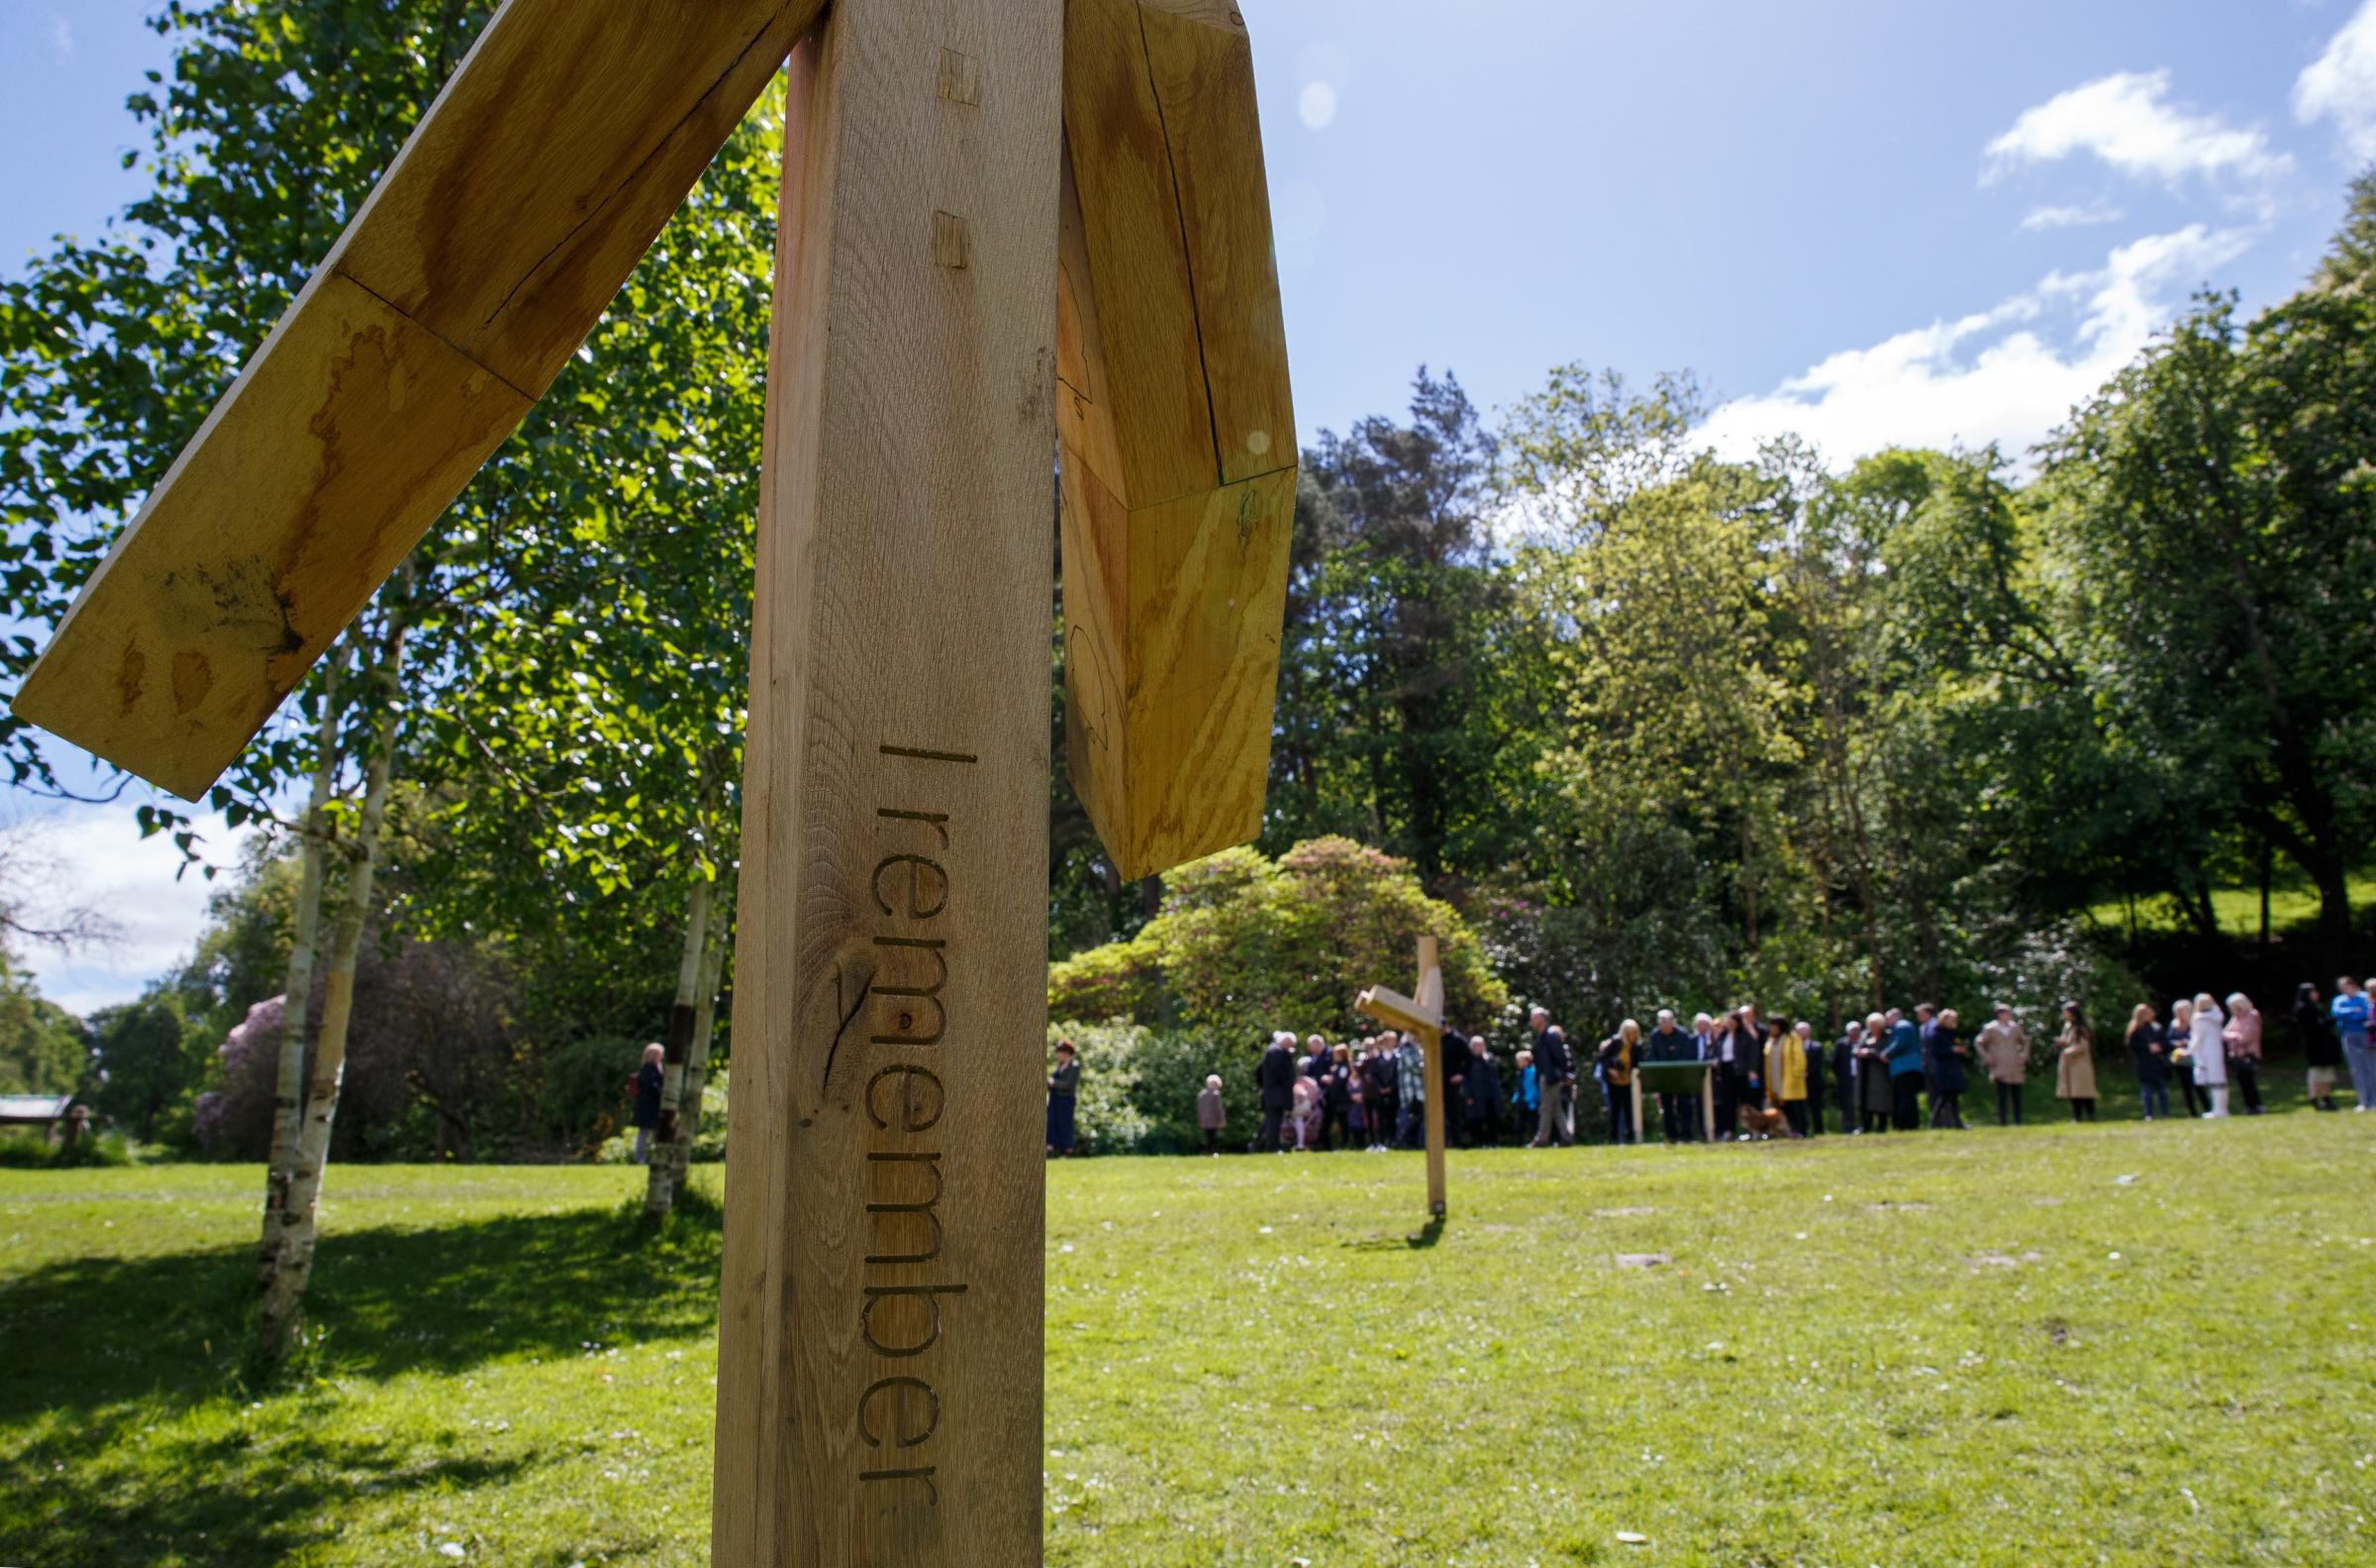 Opening of The Herald I Remember national Covid memorial. People pictured at Birch Grove in Pollok Country Park. Birch Grove is one of the areas in the park where artist Alec Finlay has installed supports as part of the I Remember memorial. Photograph by